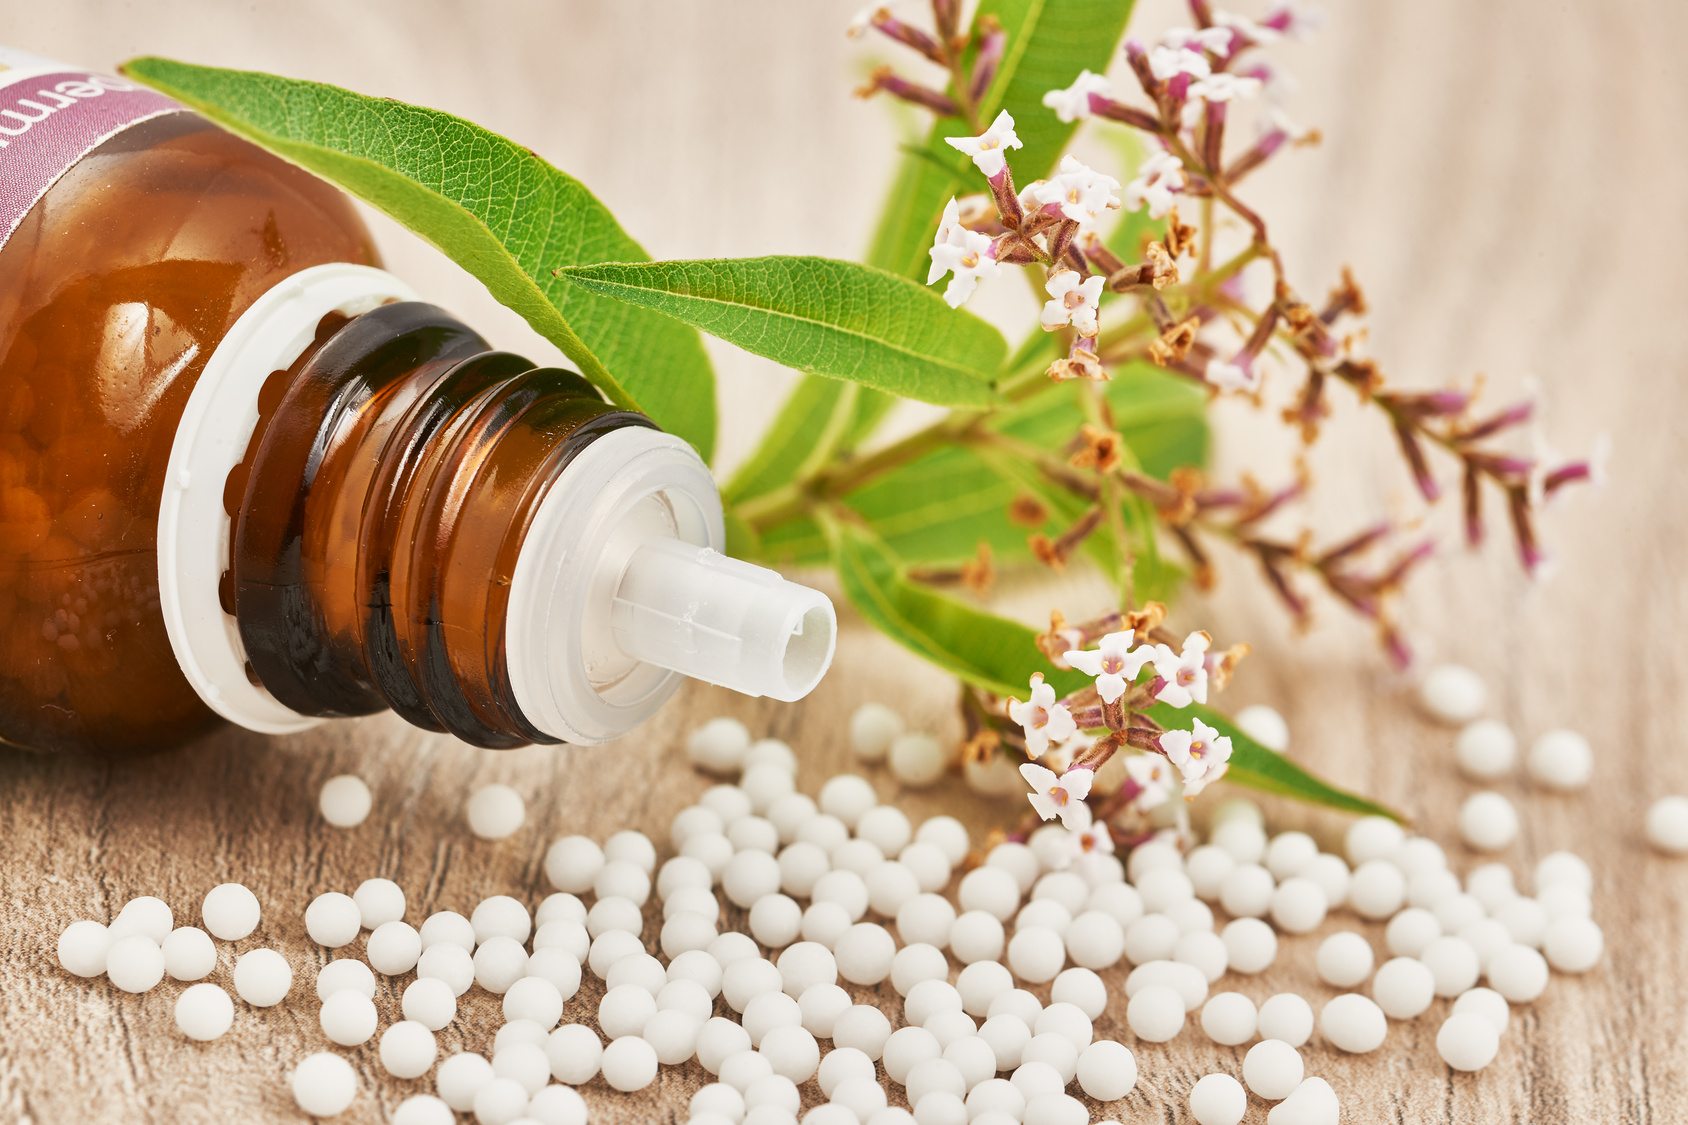 is-the-fda-getting-ready-to-ban-homeopathy